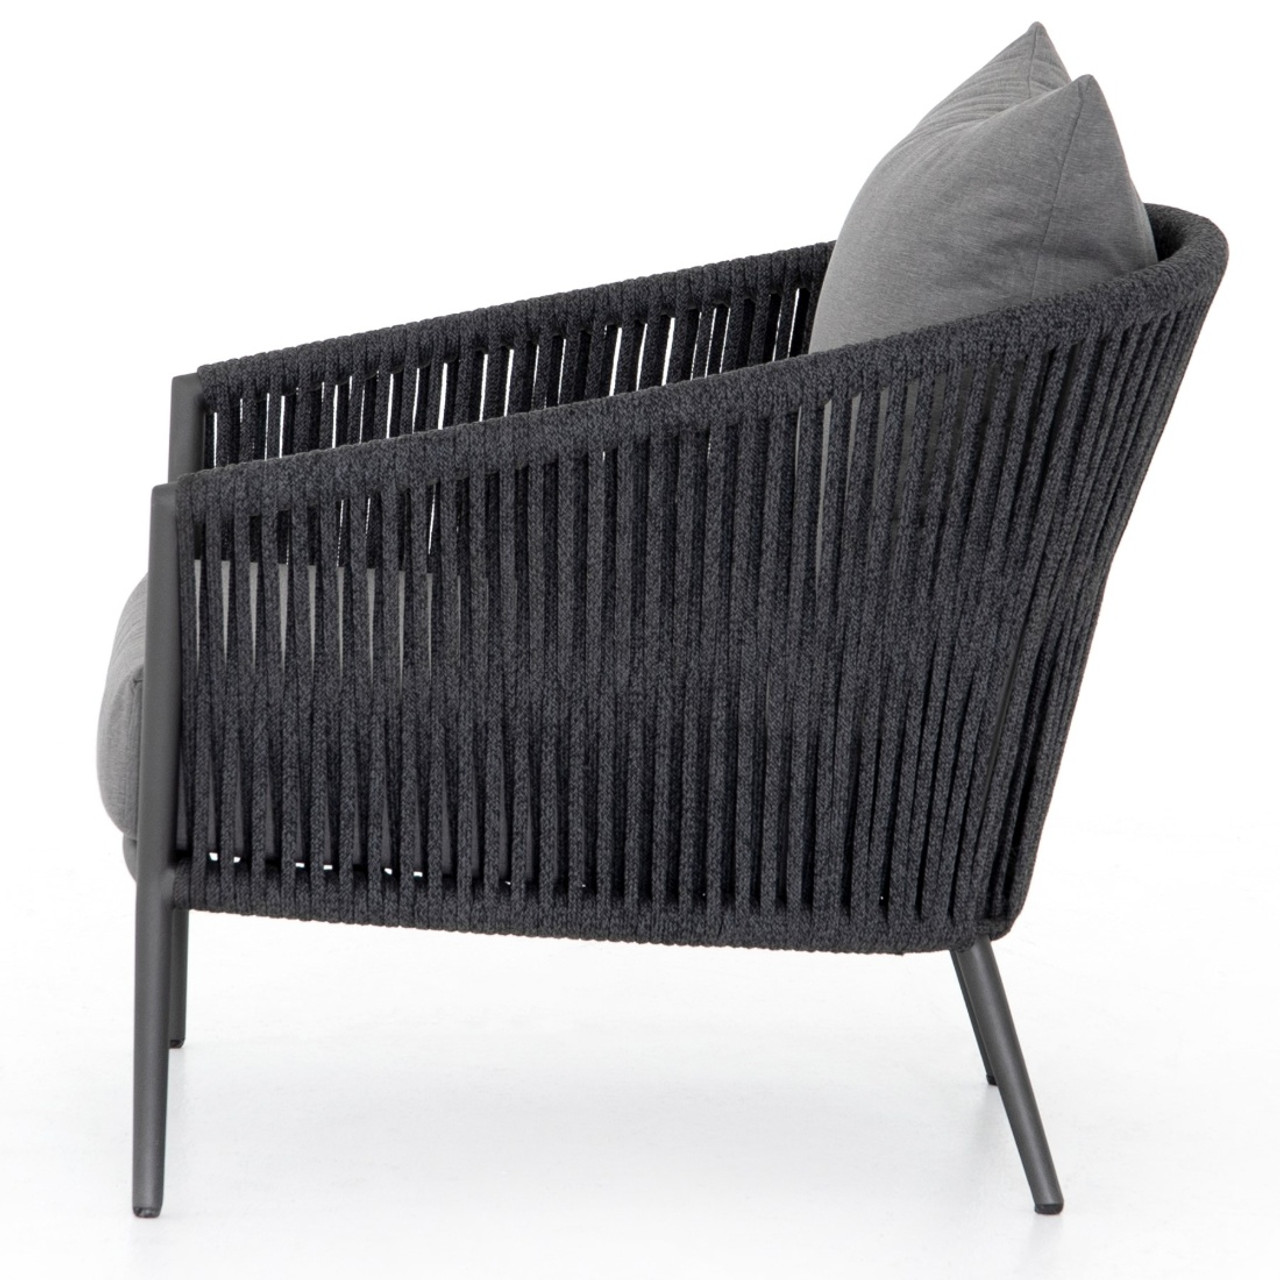 Porto Charcoal Woven Rope Outdoor Lounge Chair